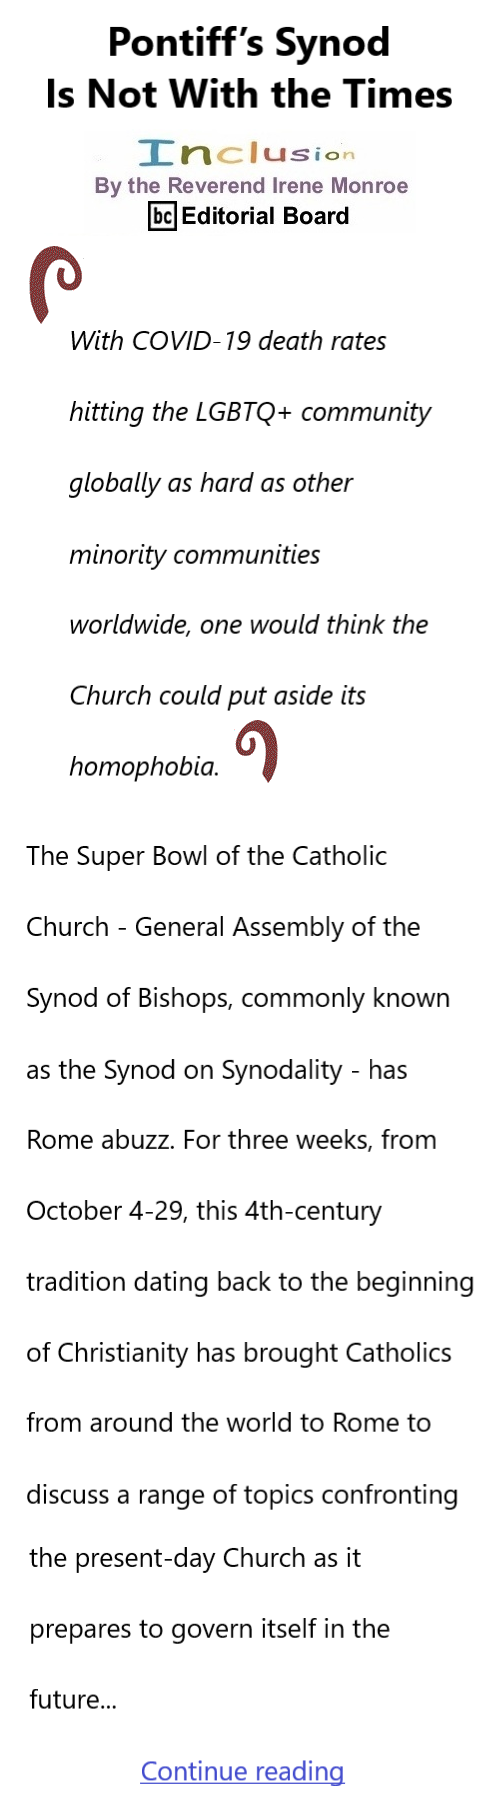 BlackCommentator.com Oct 19, 2023 - Issue 974: Pontiff’s Synod Is Not With the Times - Inclusion By The Reverend Irene Monroe, BC Editorial Board